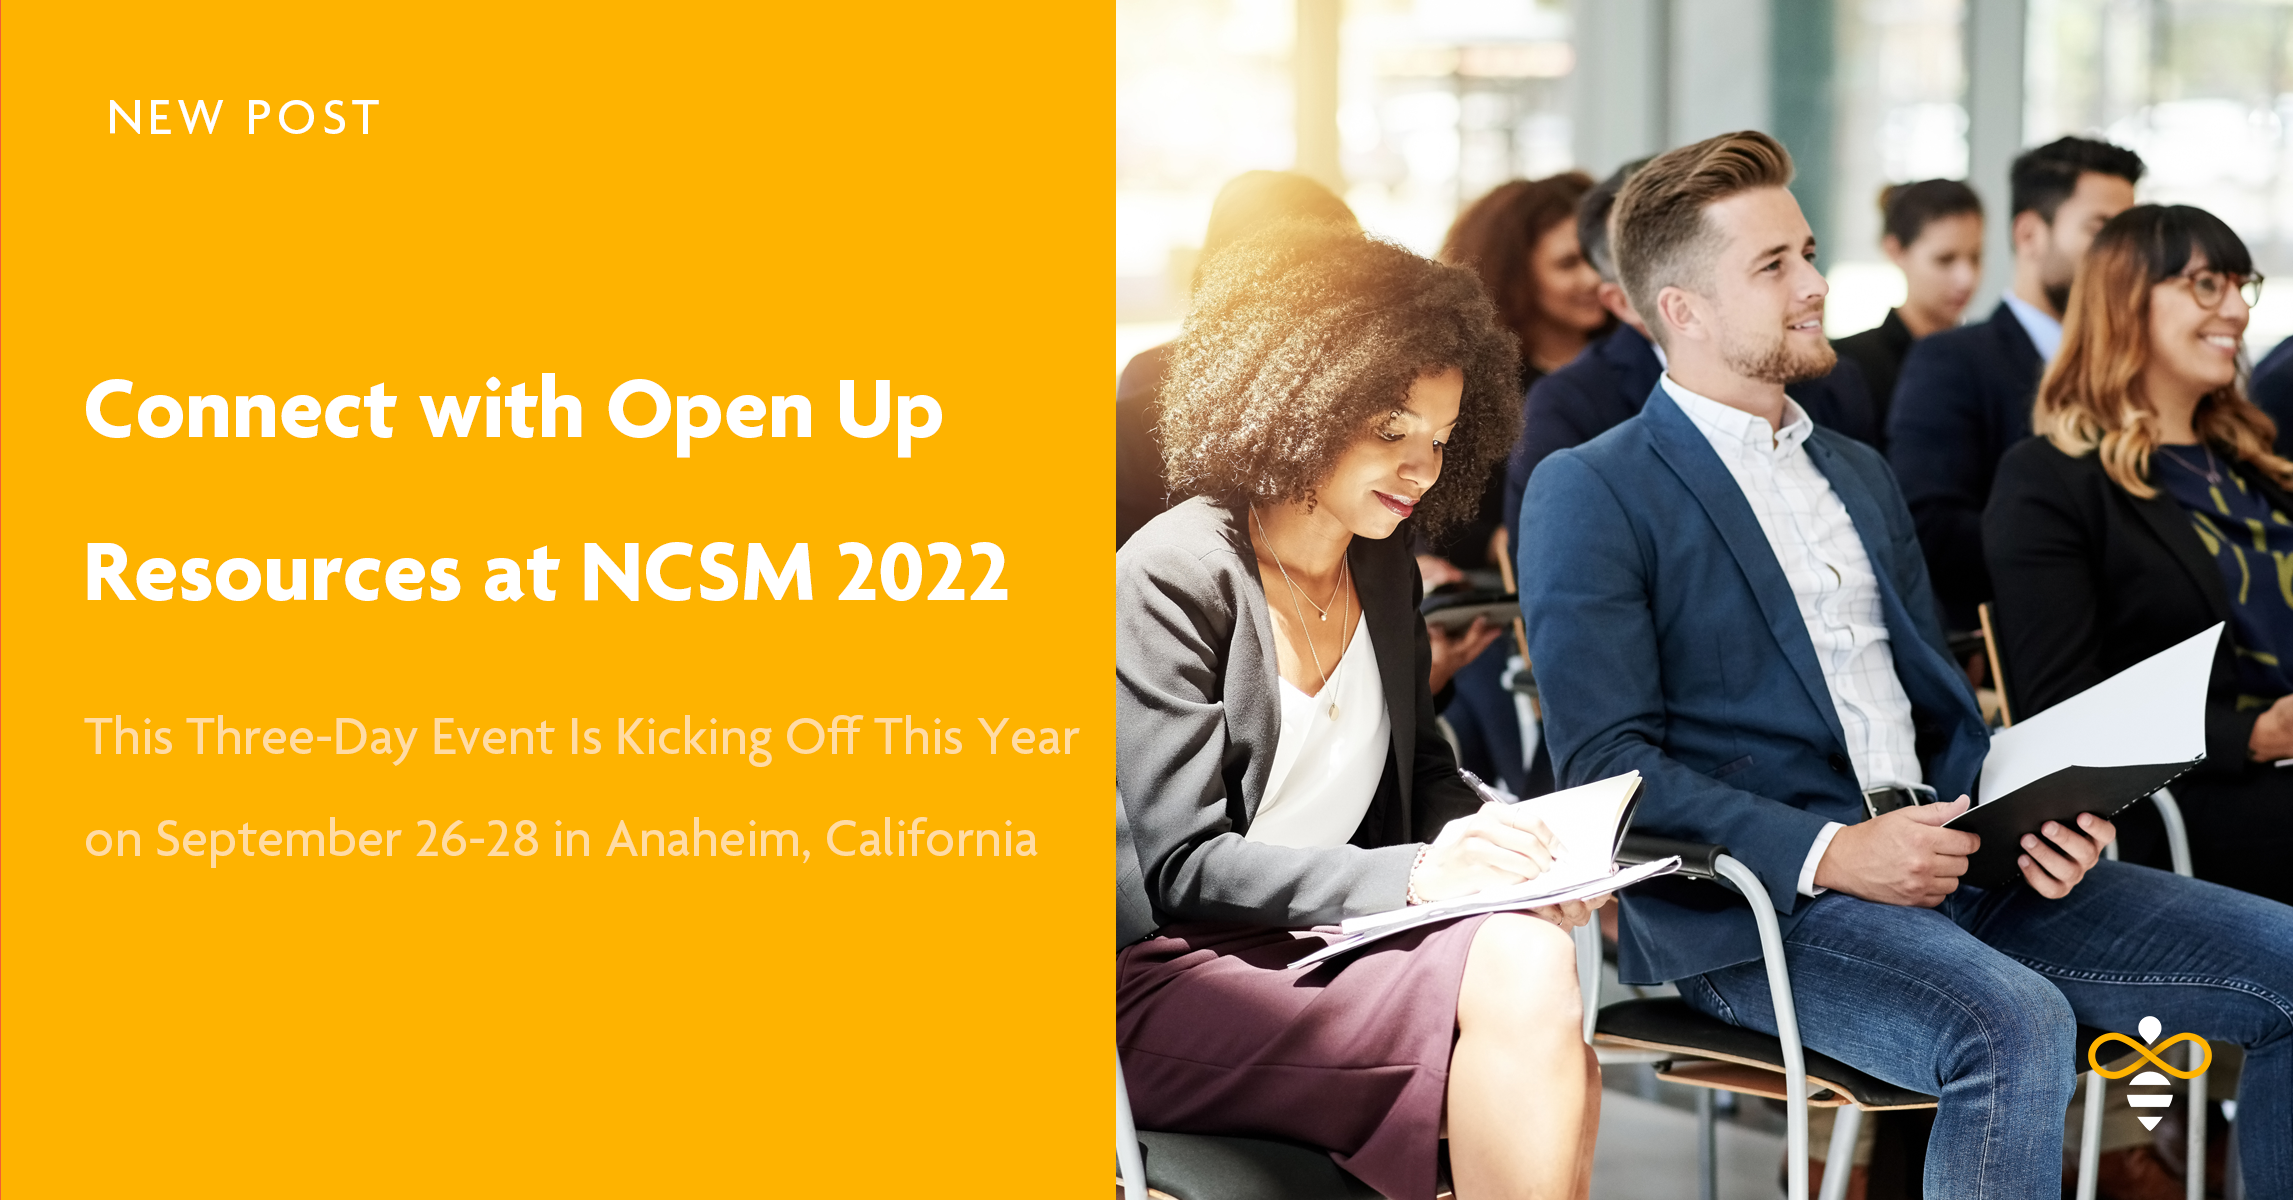 Connect with Open Up Resources at NCSM 2022